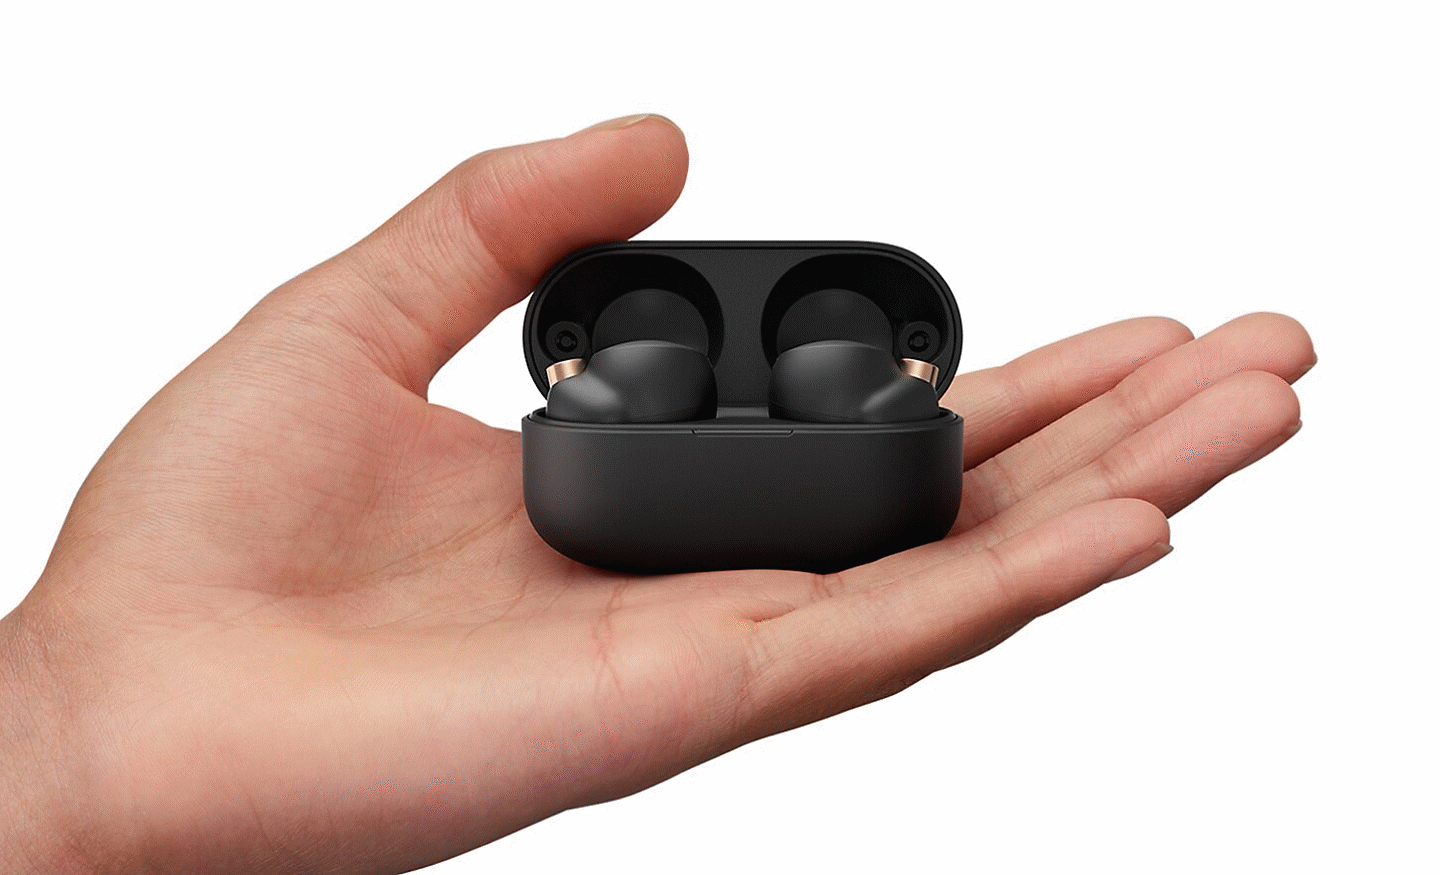 Hand holding an open charging case revealing the WF-1000XM4 headphones inside